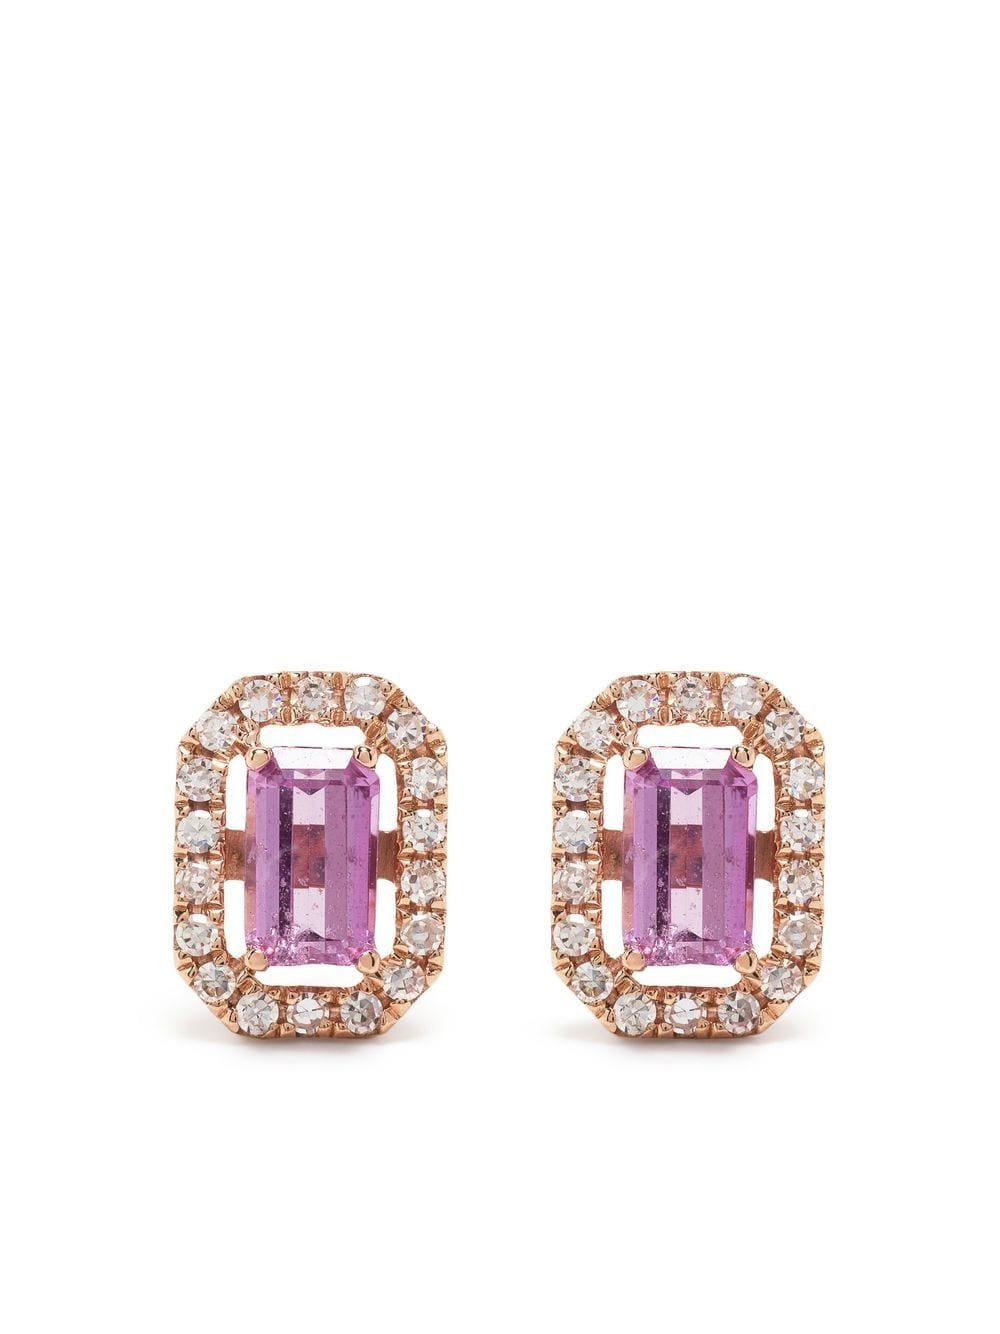 SHAY 18kt rose gold Mini Me diamond and sapphire earrings - Pink von SHAY